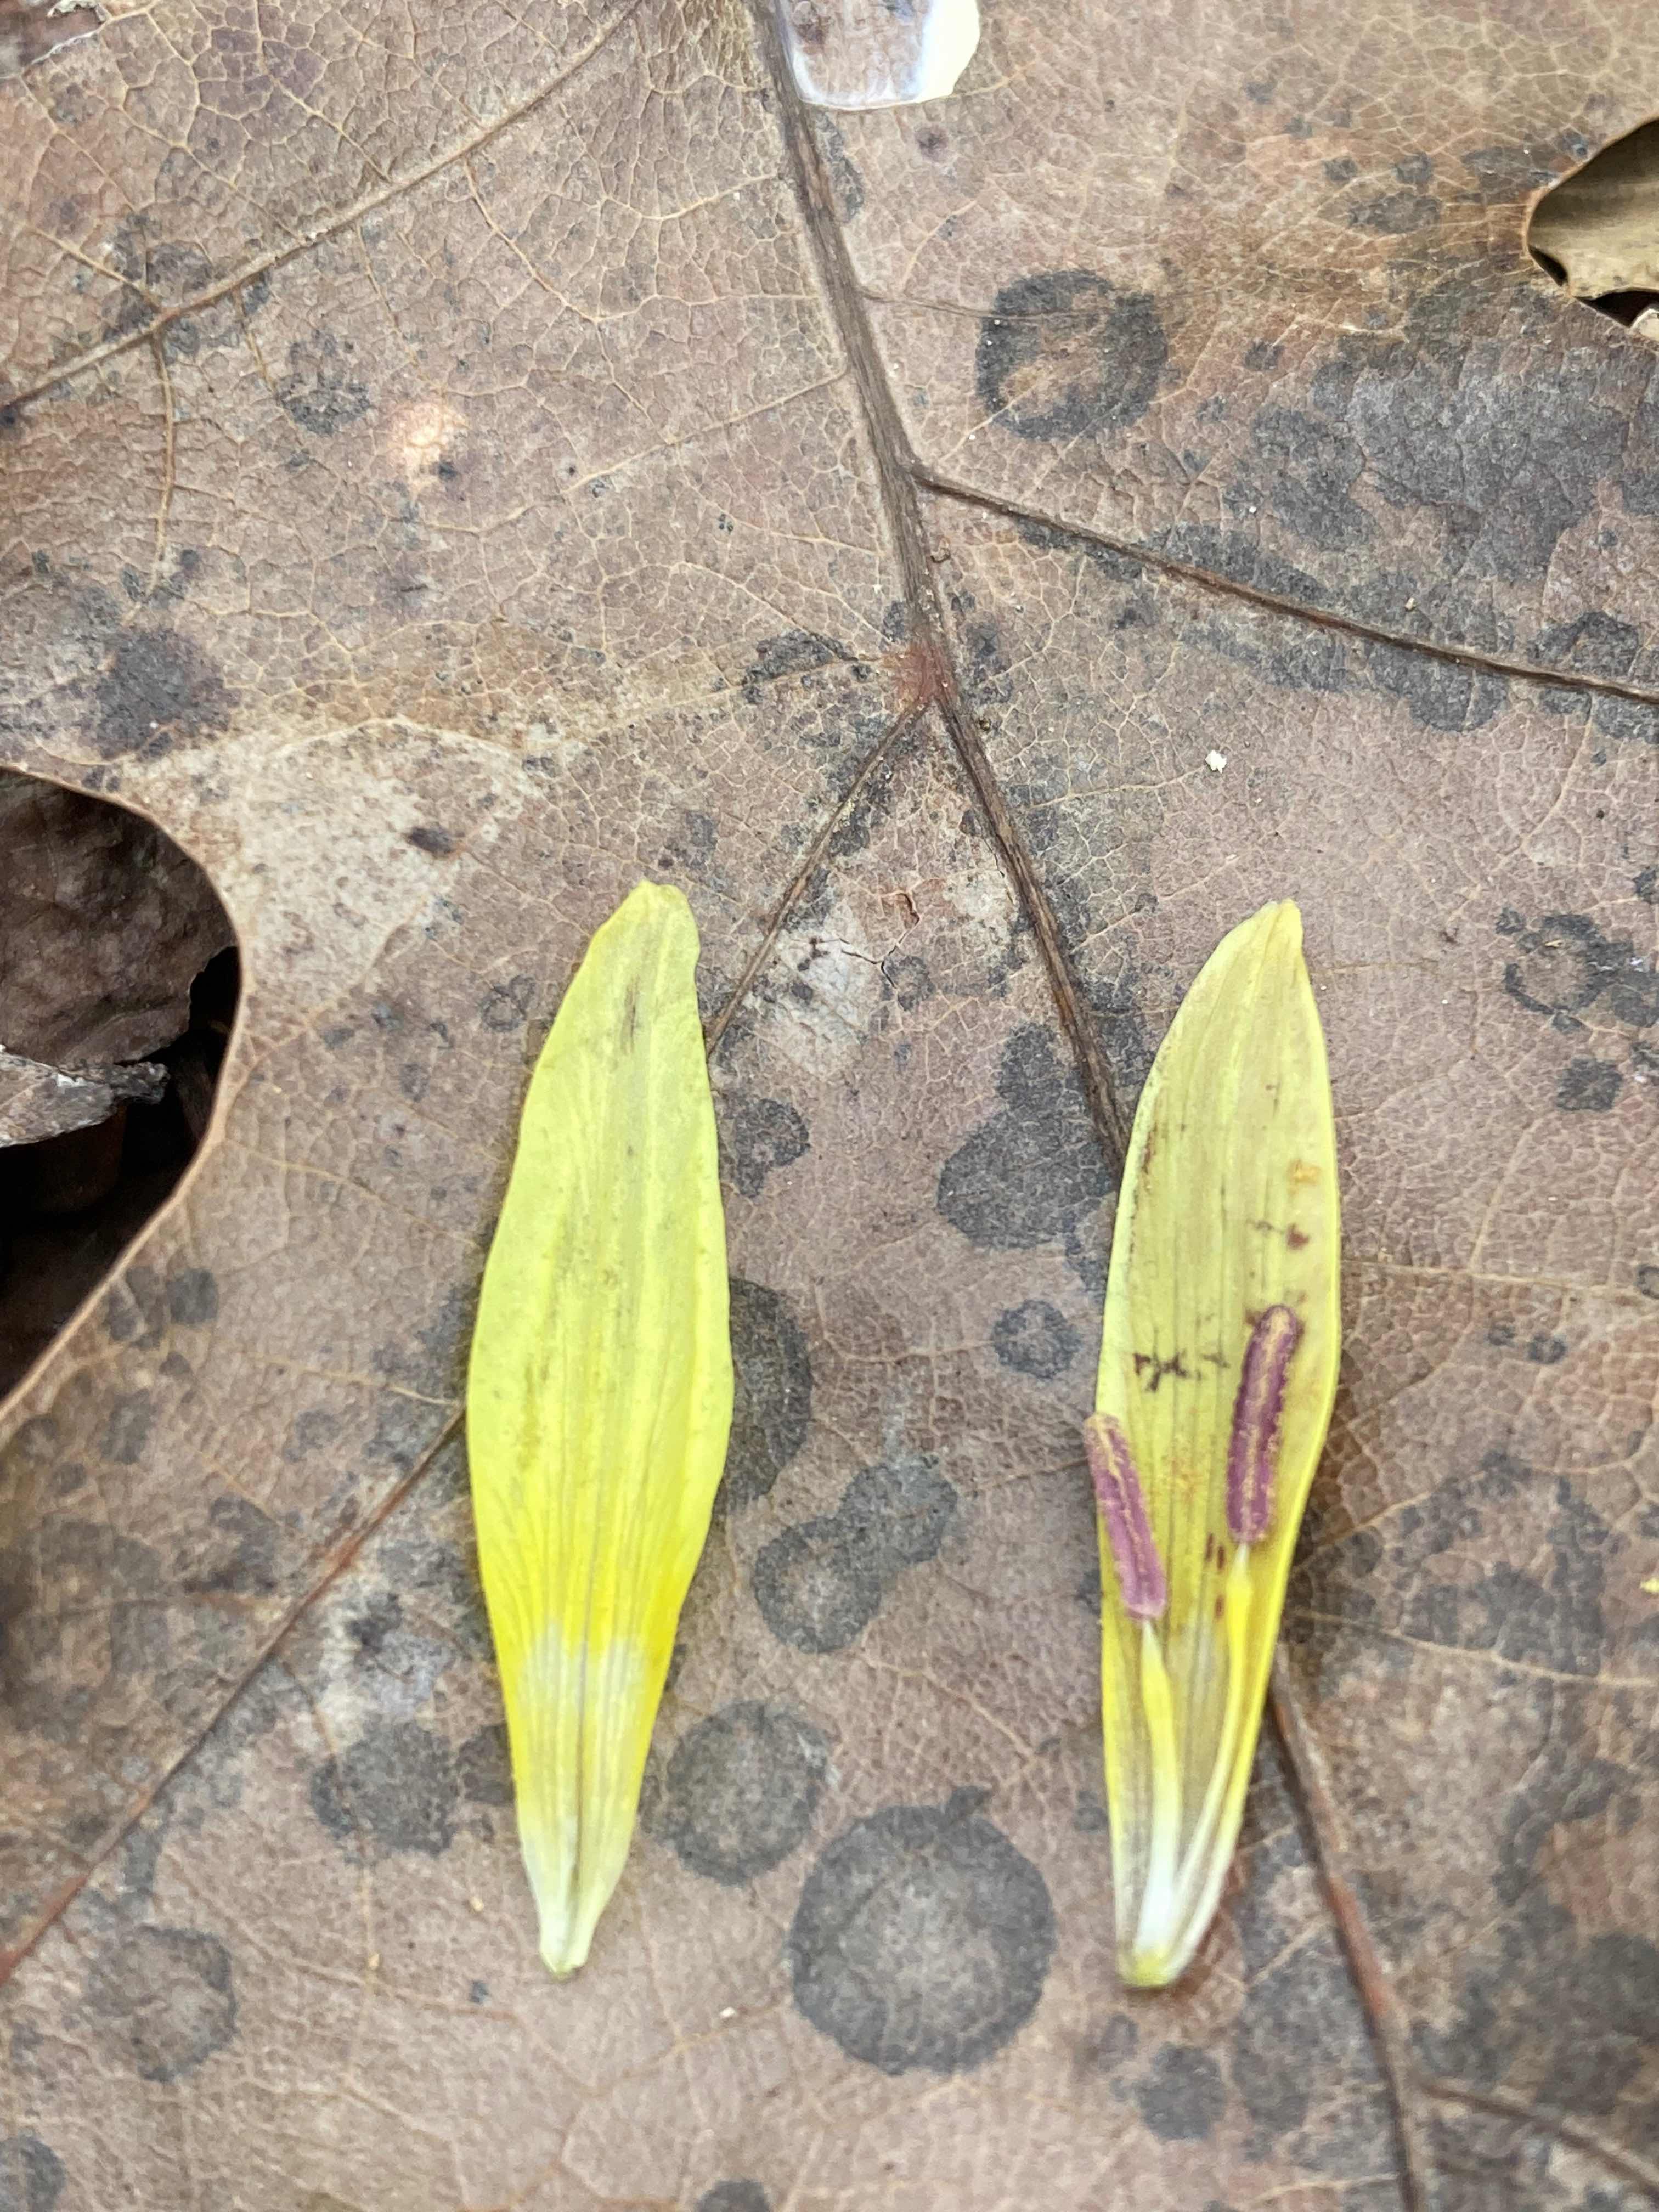 The Scientific Name is Erythronium umbilicatum [split from Erythronium americanum]. You will likely hear them called Dimpled Trout Lily, Dog-tooth Violet, Fawn Lily. This picture shows the  The  base of the inner 3 tepals do not have an auricle as does the similar <em>E. americanum.</em> of Erythronium umbilicatum [split from Erythronium americanum]